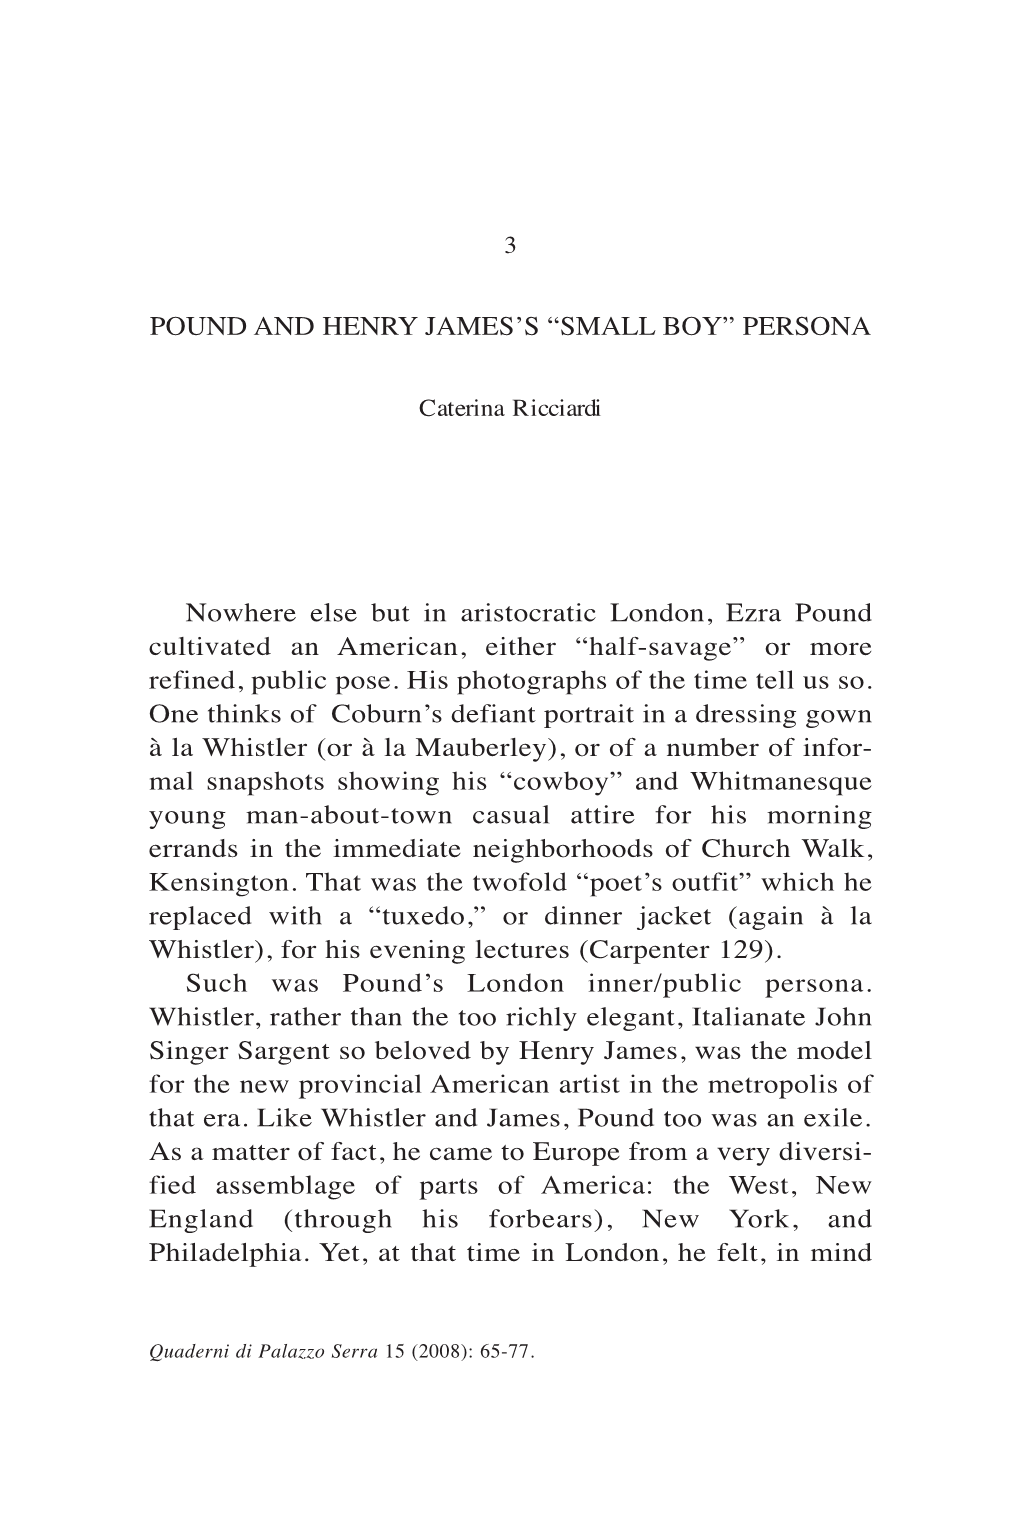 Pound and Henry James's